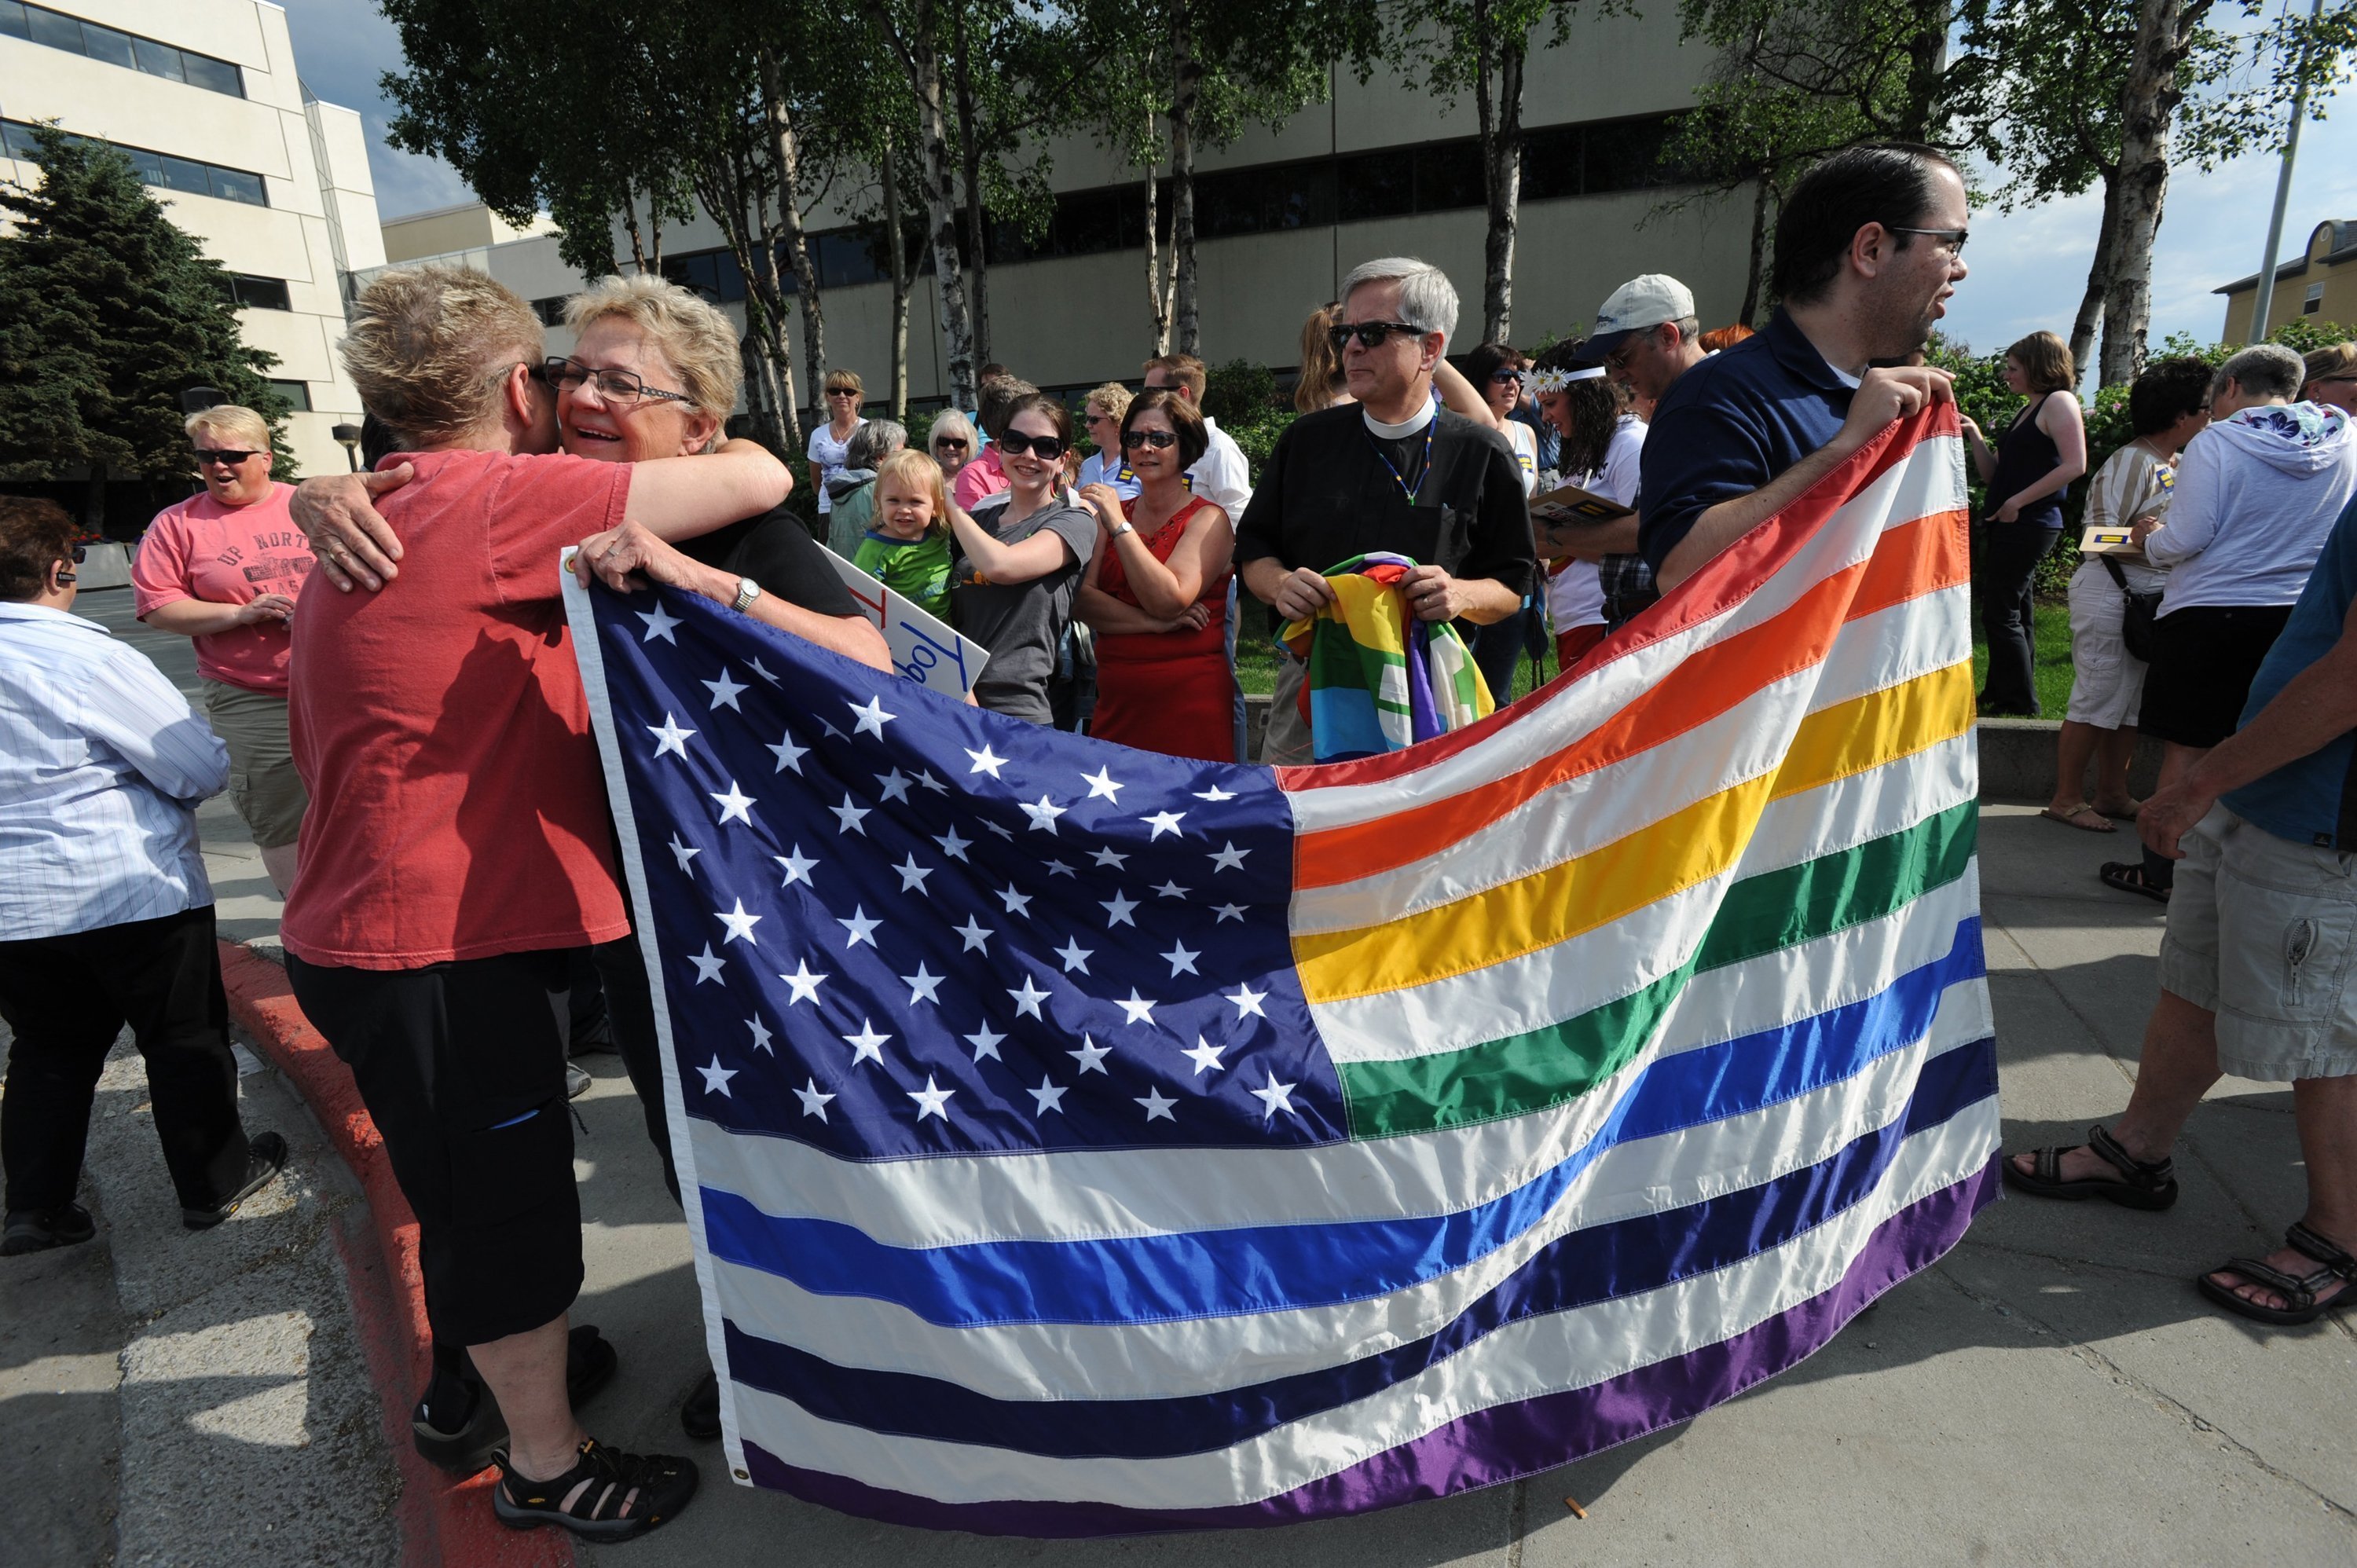 The United For Marriage Rally drew over 100 people outside the Federal Building in Anchorage, Alaska, Wednesday, June 26, 2013 (Anchorage Daily News/Getty Images)